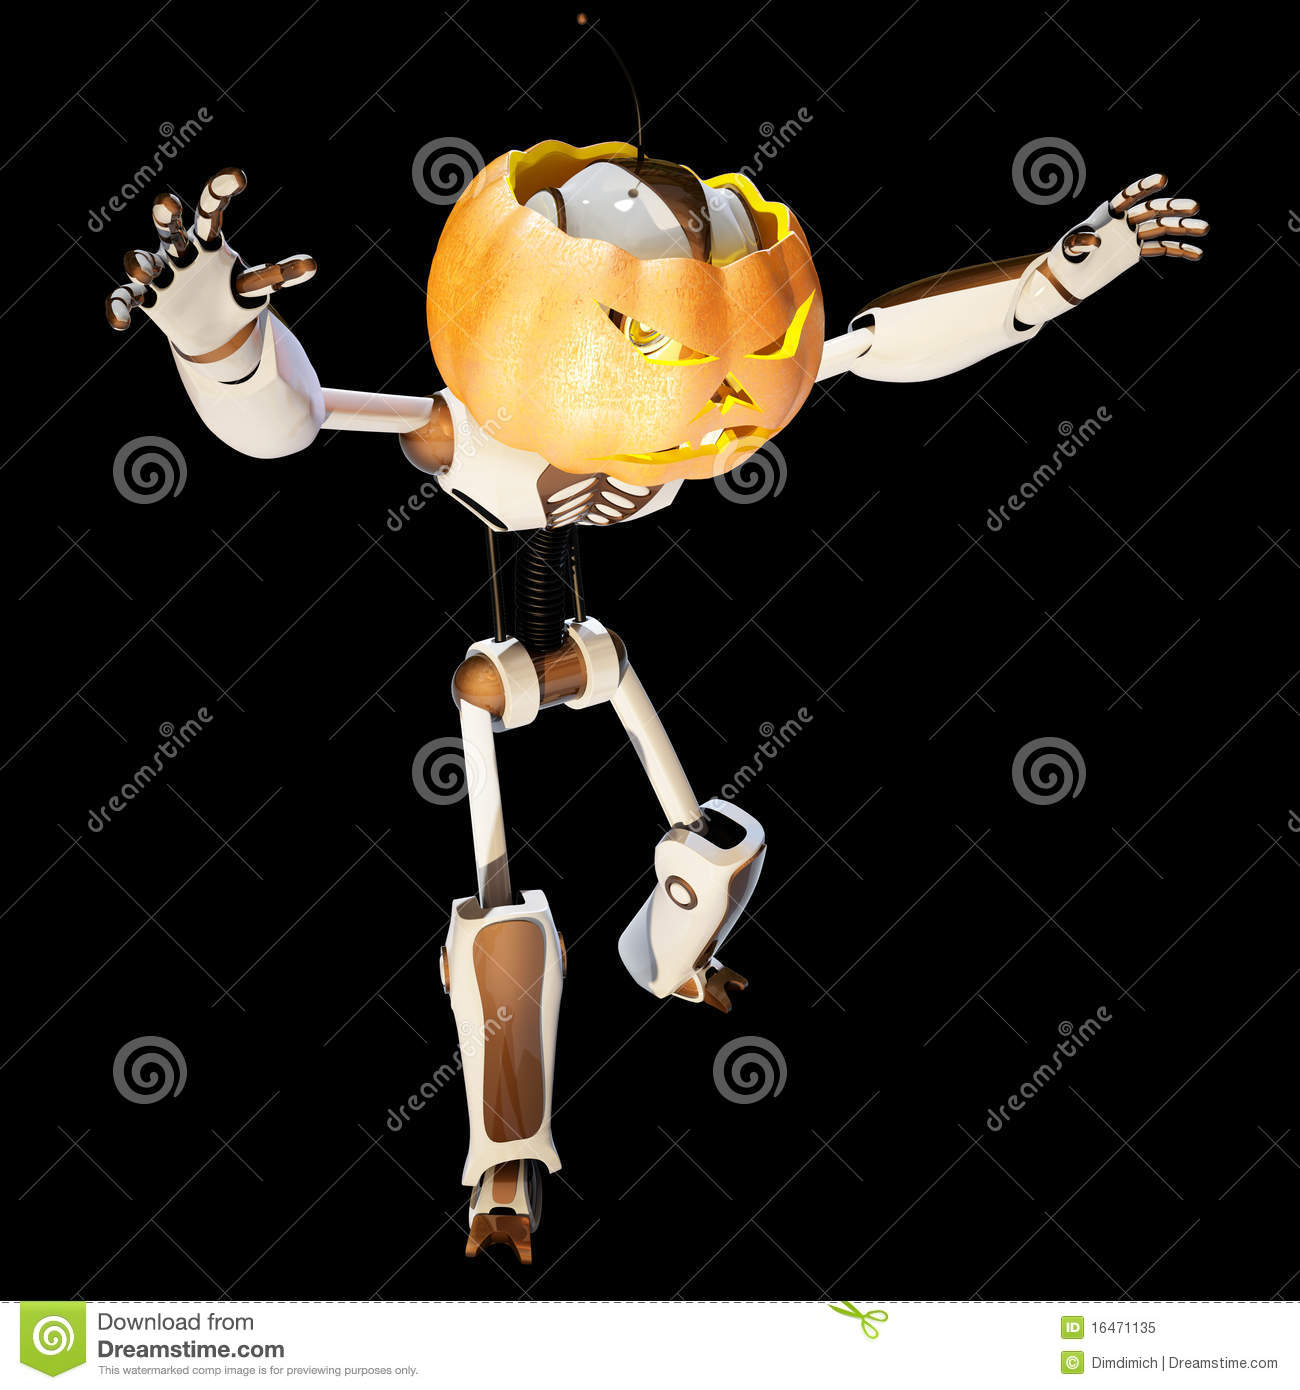 Scary Robot With A Pumpkin On His Head  With Clipping Path